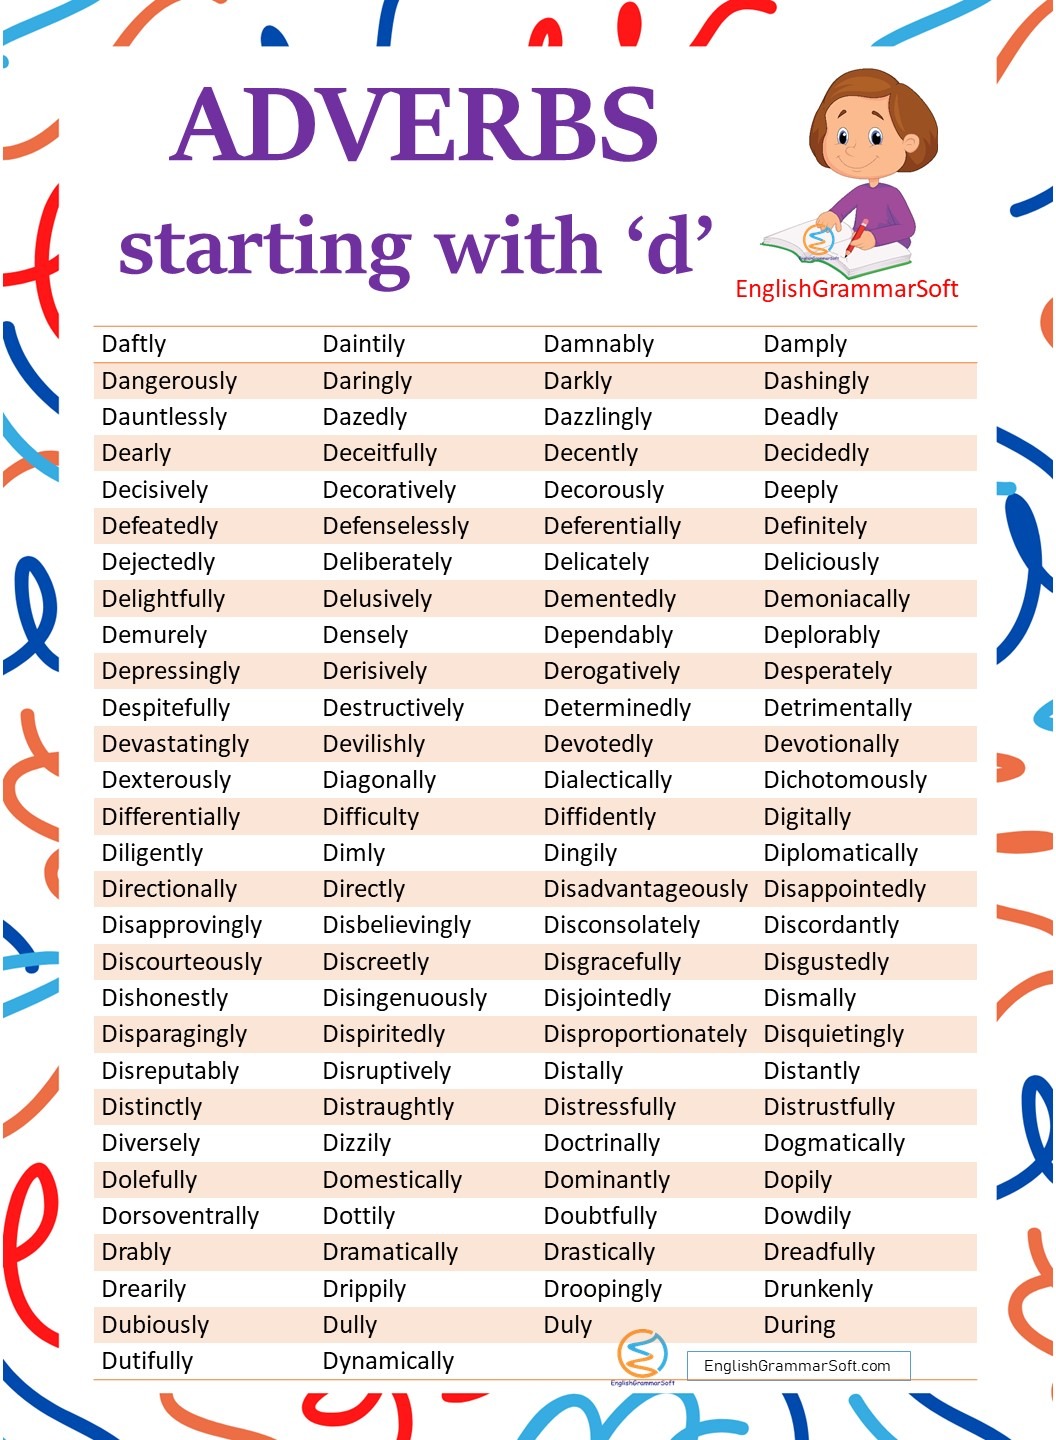 adverbs starting with 'd'